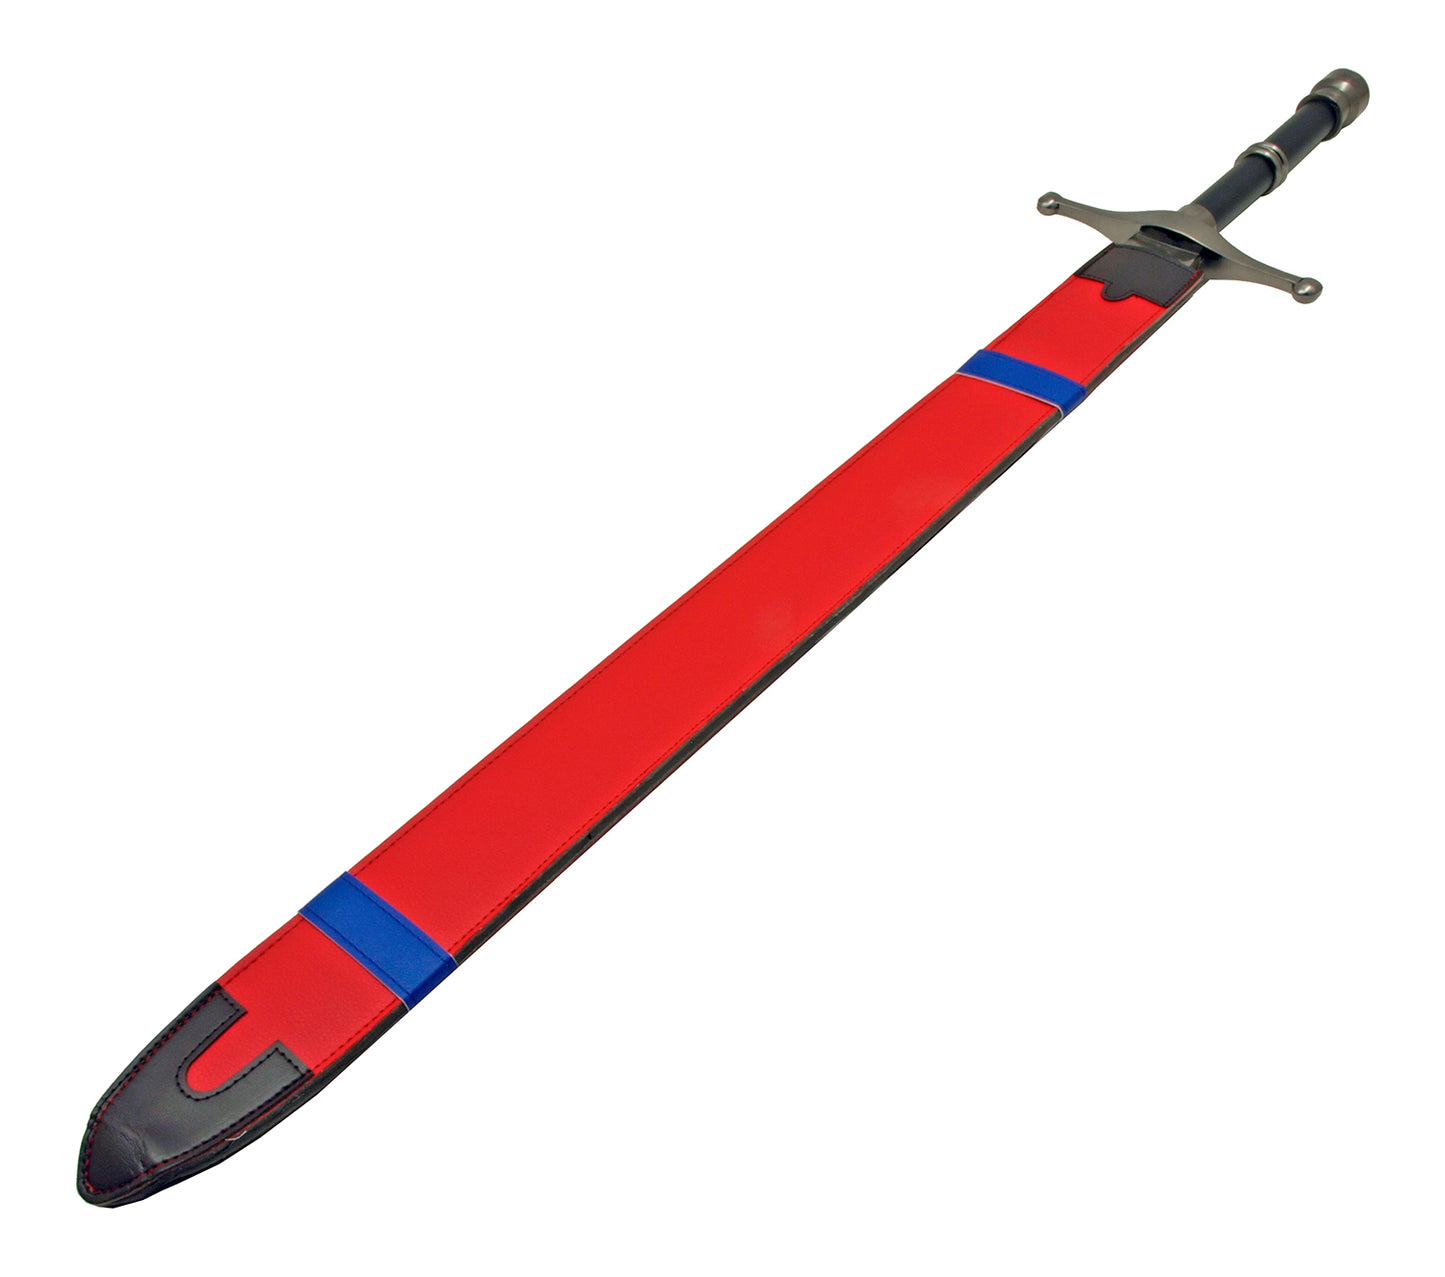 Dragon Ball Z Trunks' Sword - Blue and Red